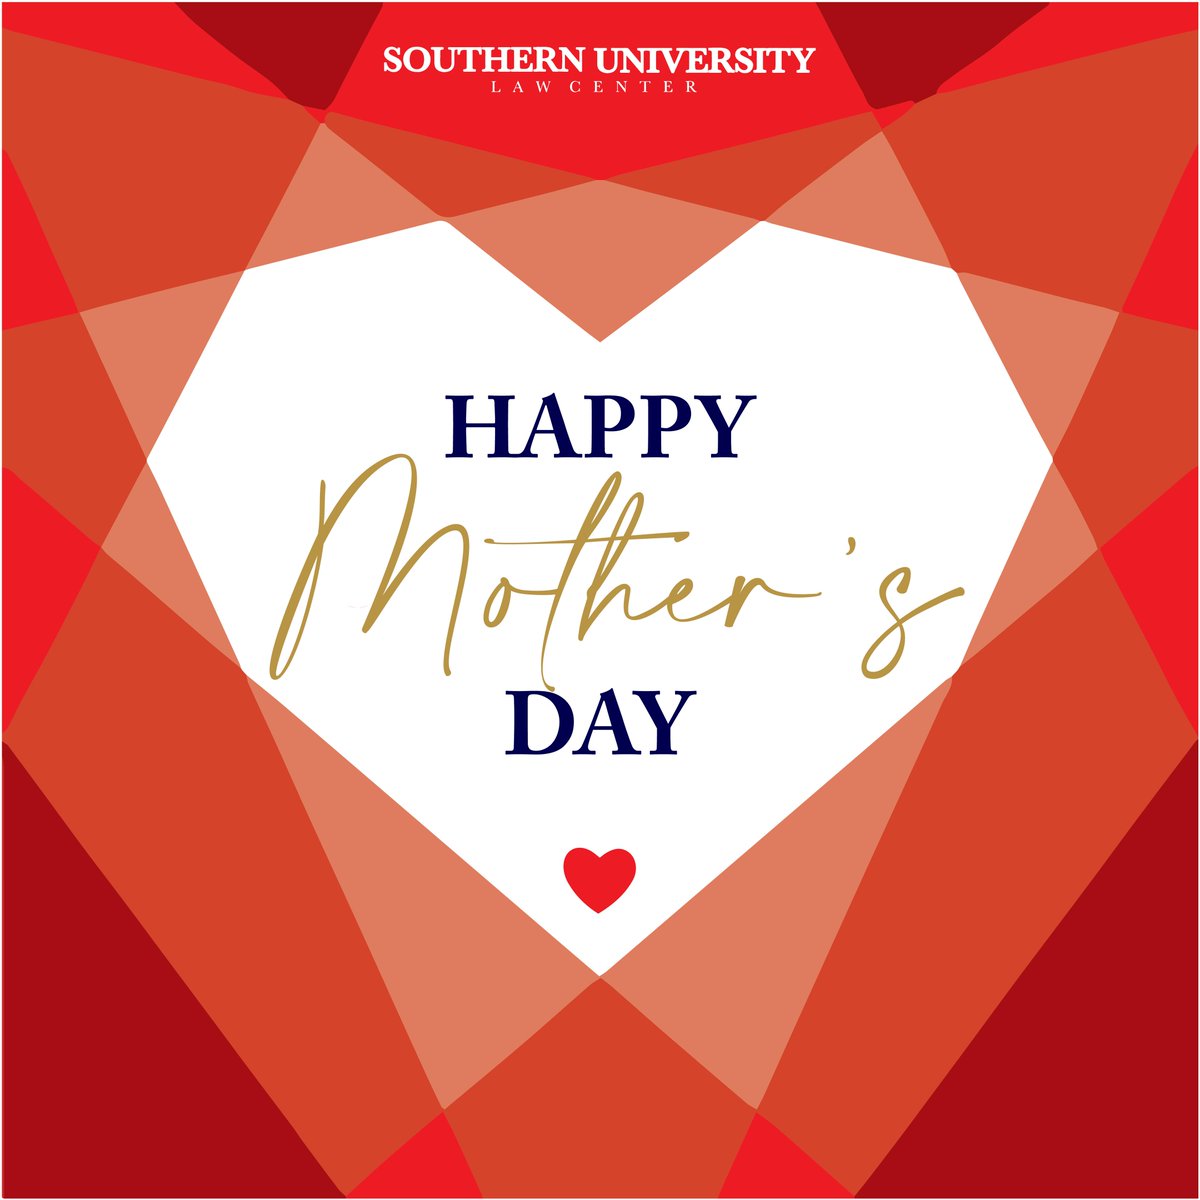 Happy Mother's Day to all of the incredible moms! Today, we celebrate the selflessness, love, and strength that you bring into our lives every single day. #MothersDay #SULC